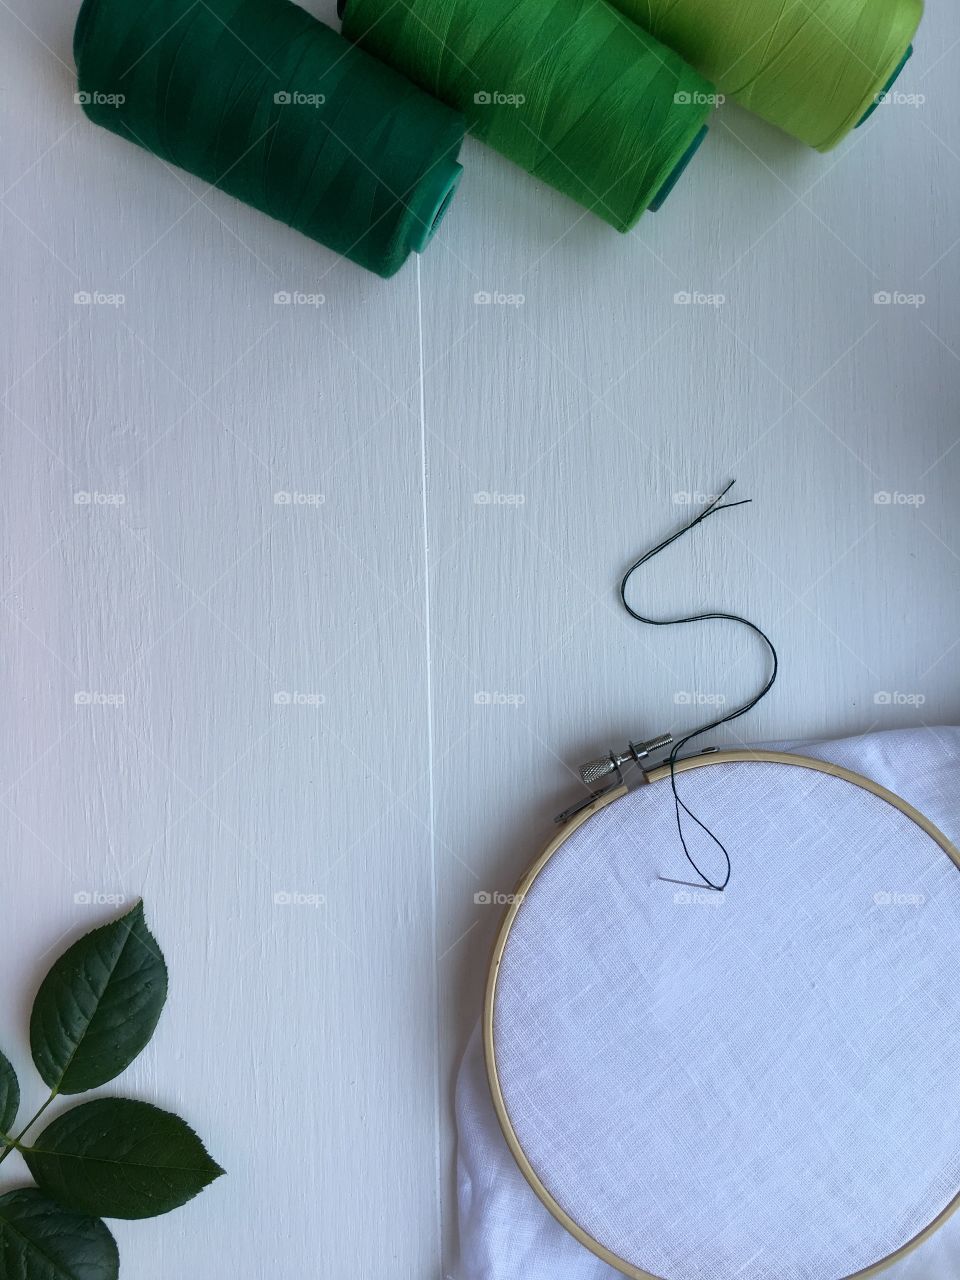 Set the green thread in the bobbin for sewing and embroidery, top view 